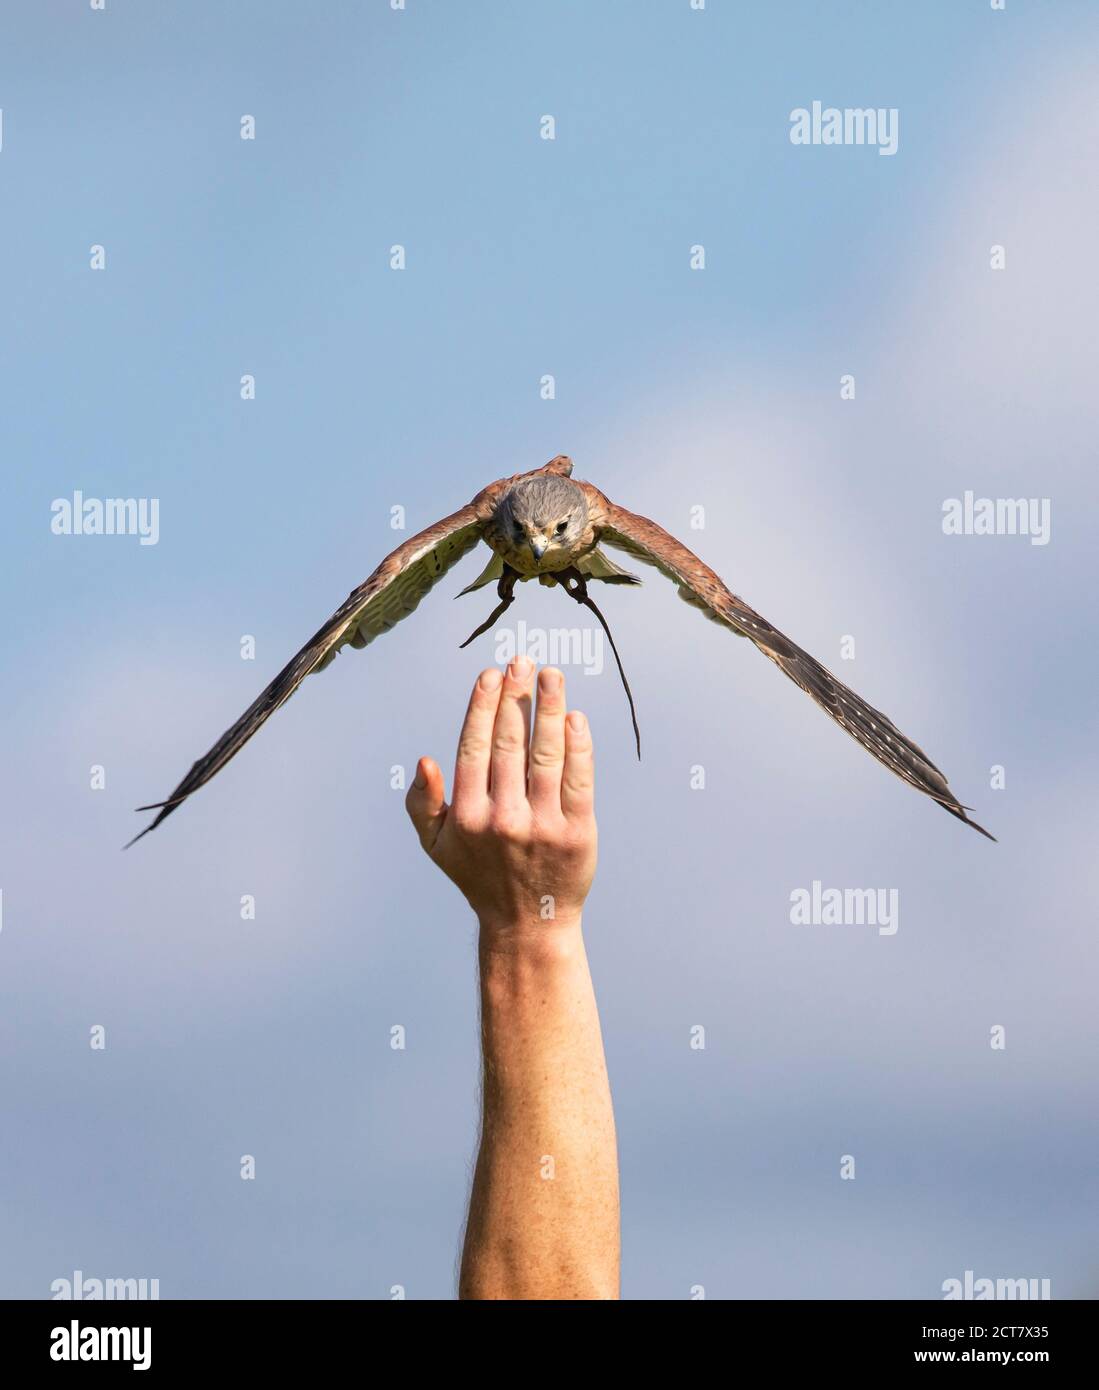 A common kestrel, Falco tinnunculus, at the British Birds of Prey Centre, based at the National Botanical Gardens of Wales trained to respond to hand Stock Photo